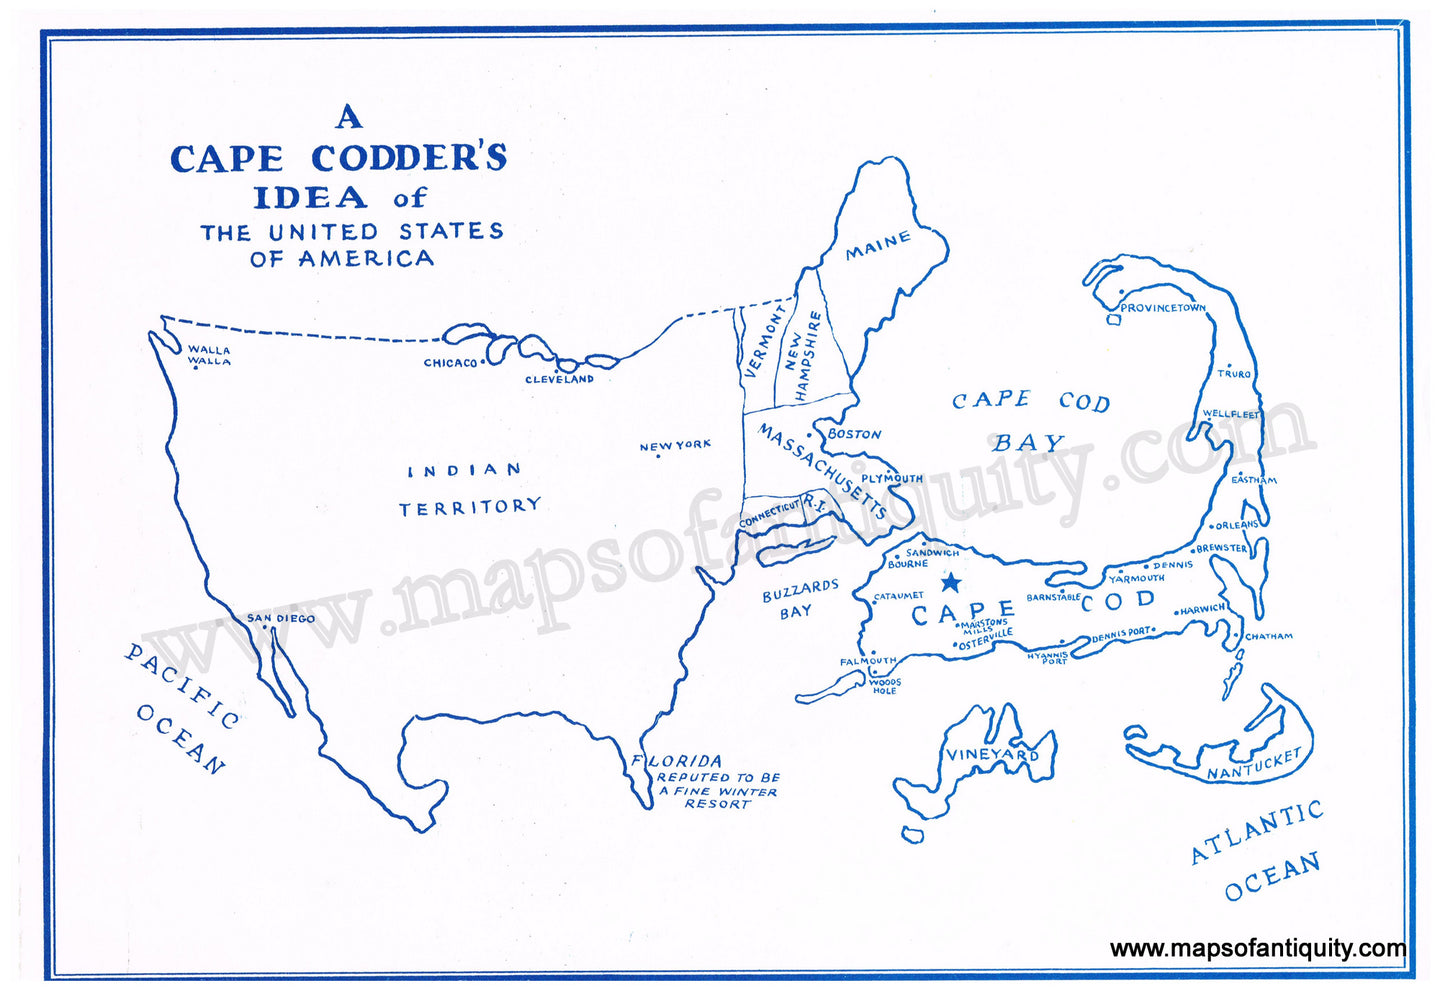 Reproduction-A-Cape-Codder's-Idea-of-the-United-States-of-America-White-Print-Date-Unknown-Massachusetts-20th-century-Maps-of-Antiquity